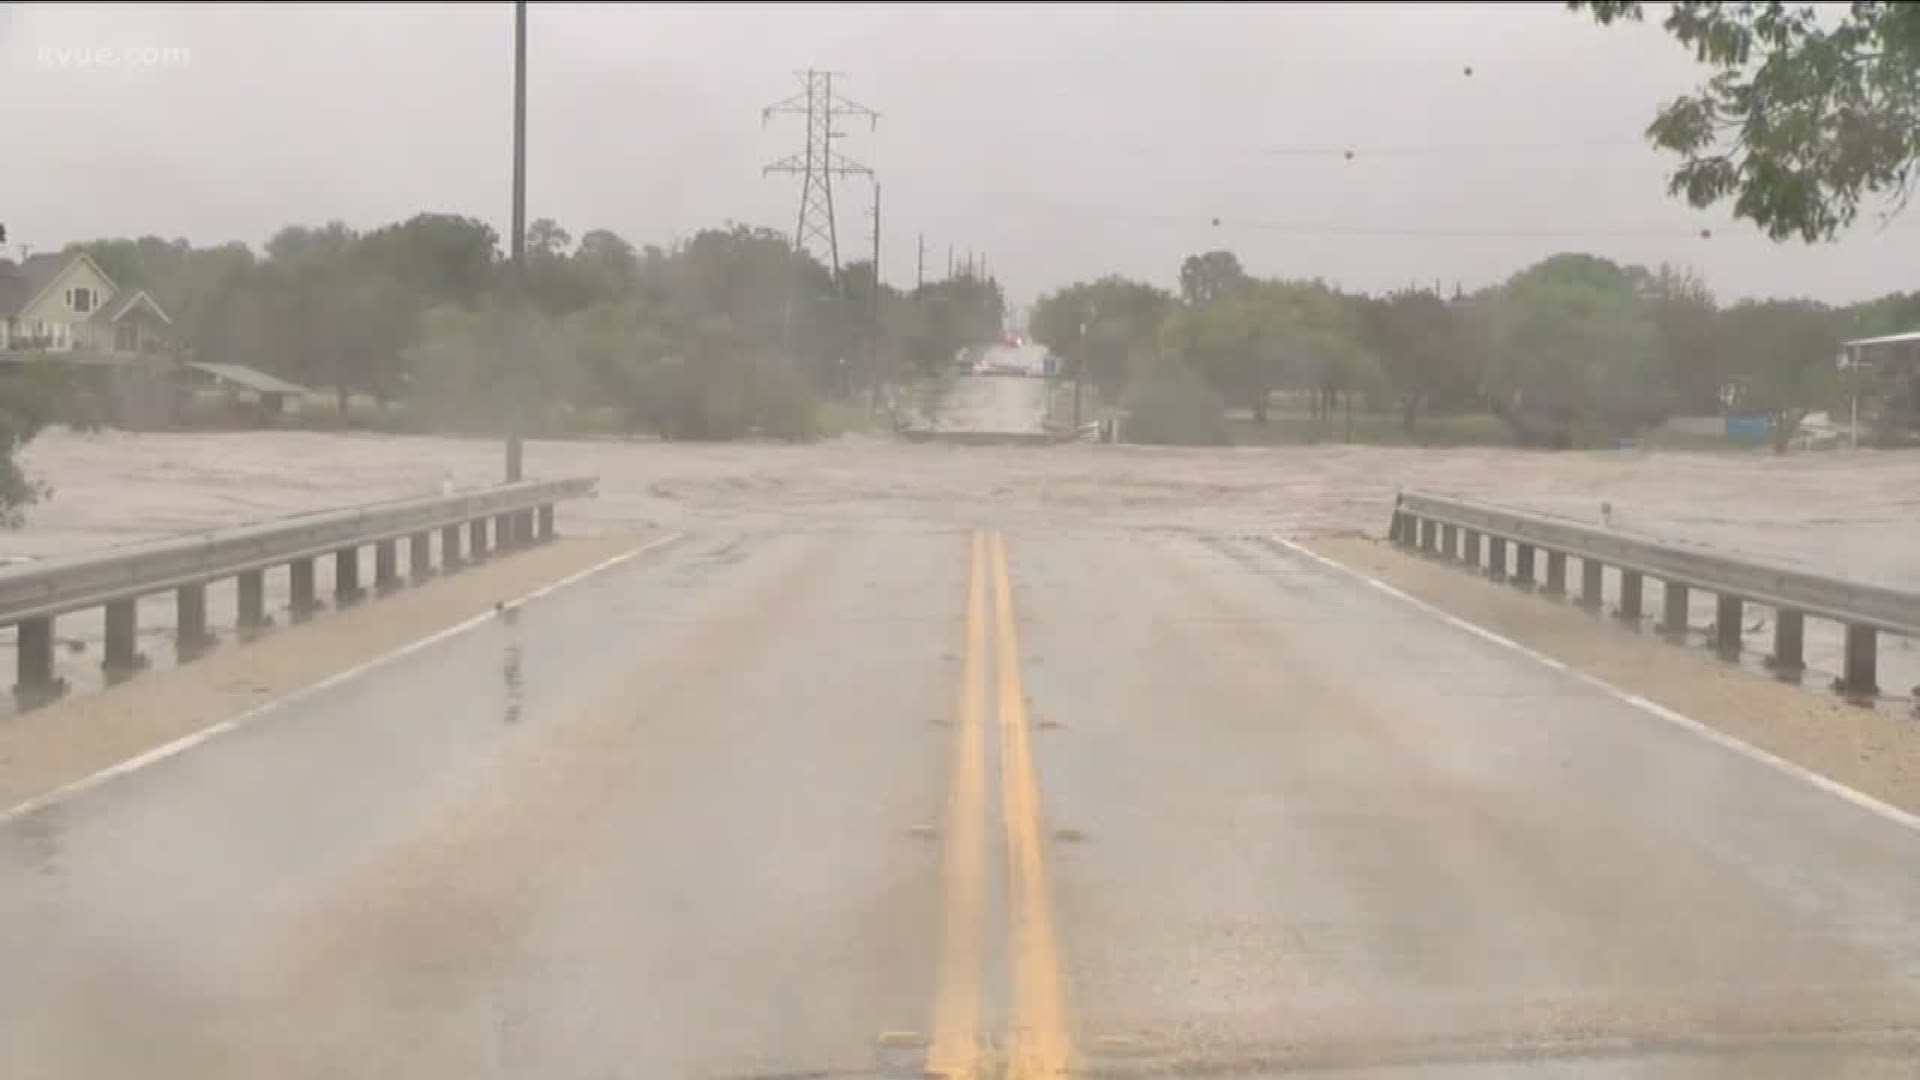 A year ago, devastating and historic flooding tore through Central Texas, destroying the FM 2900 bridge in Kingsland.